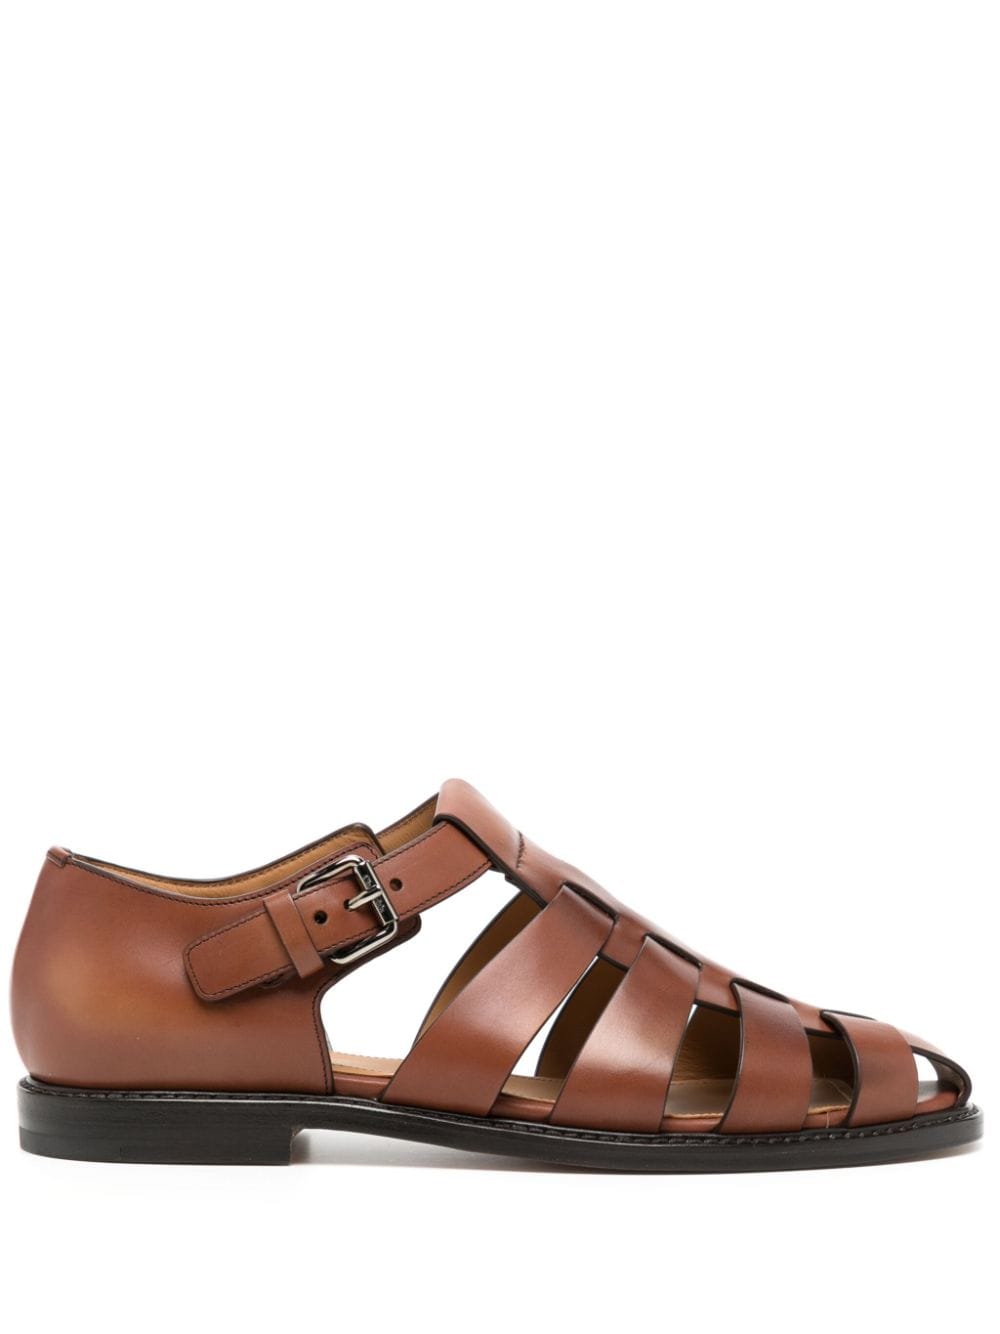 Shop Church's Buckled Leather Sandals In Brown